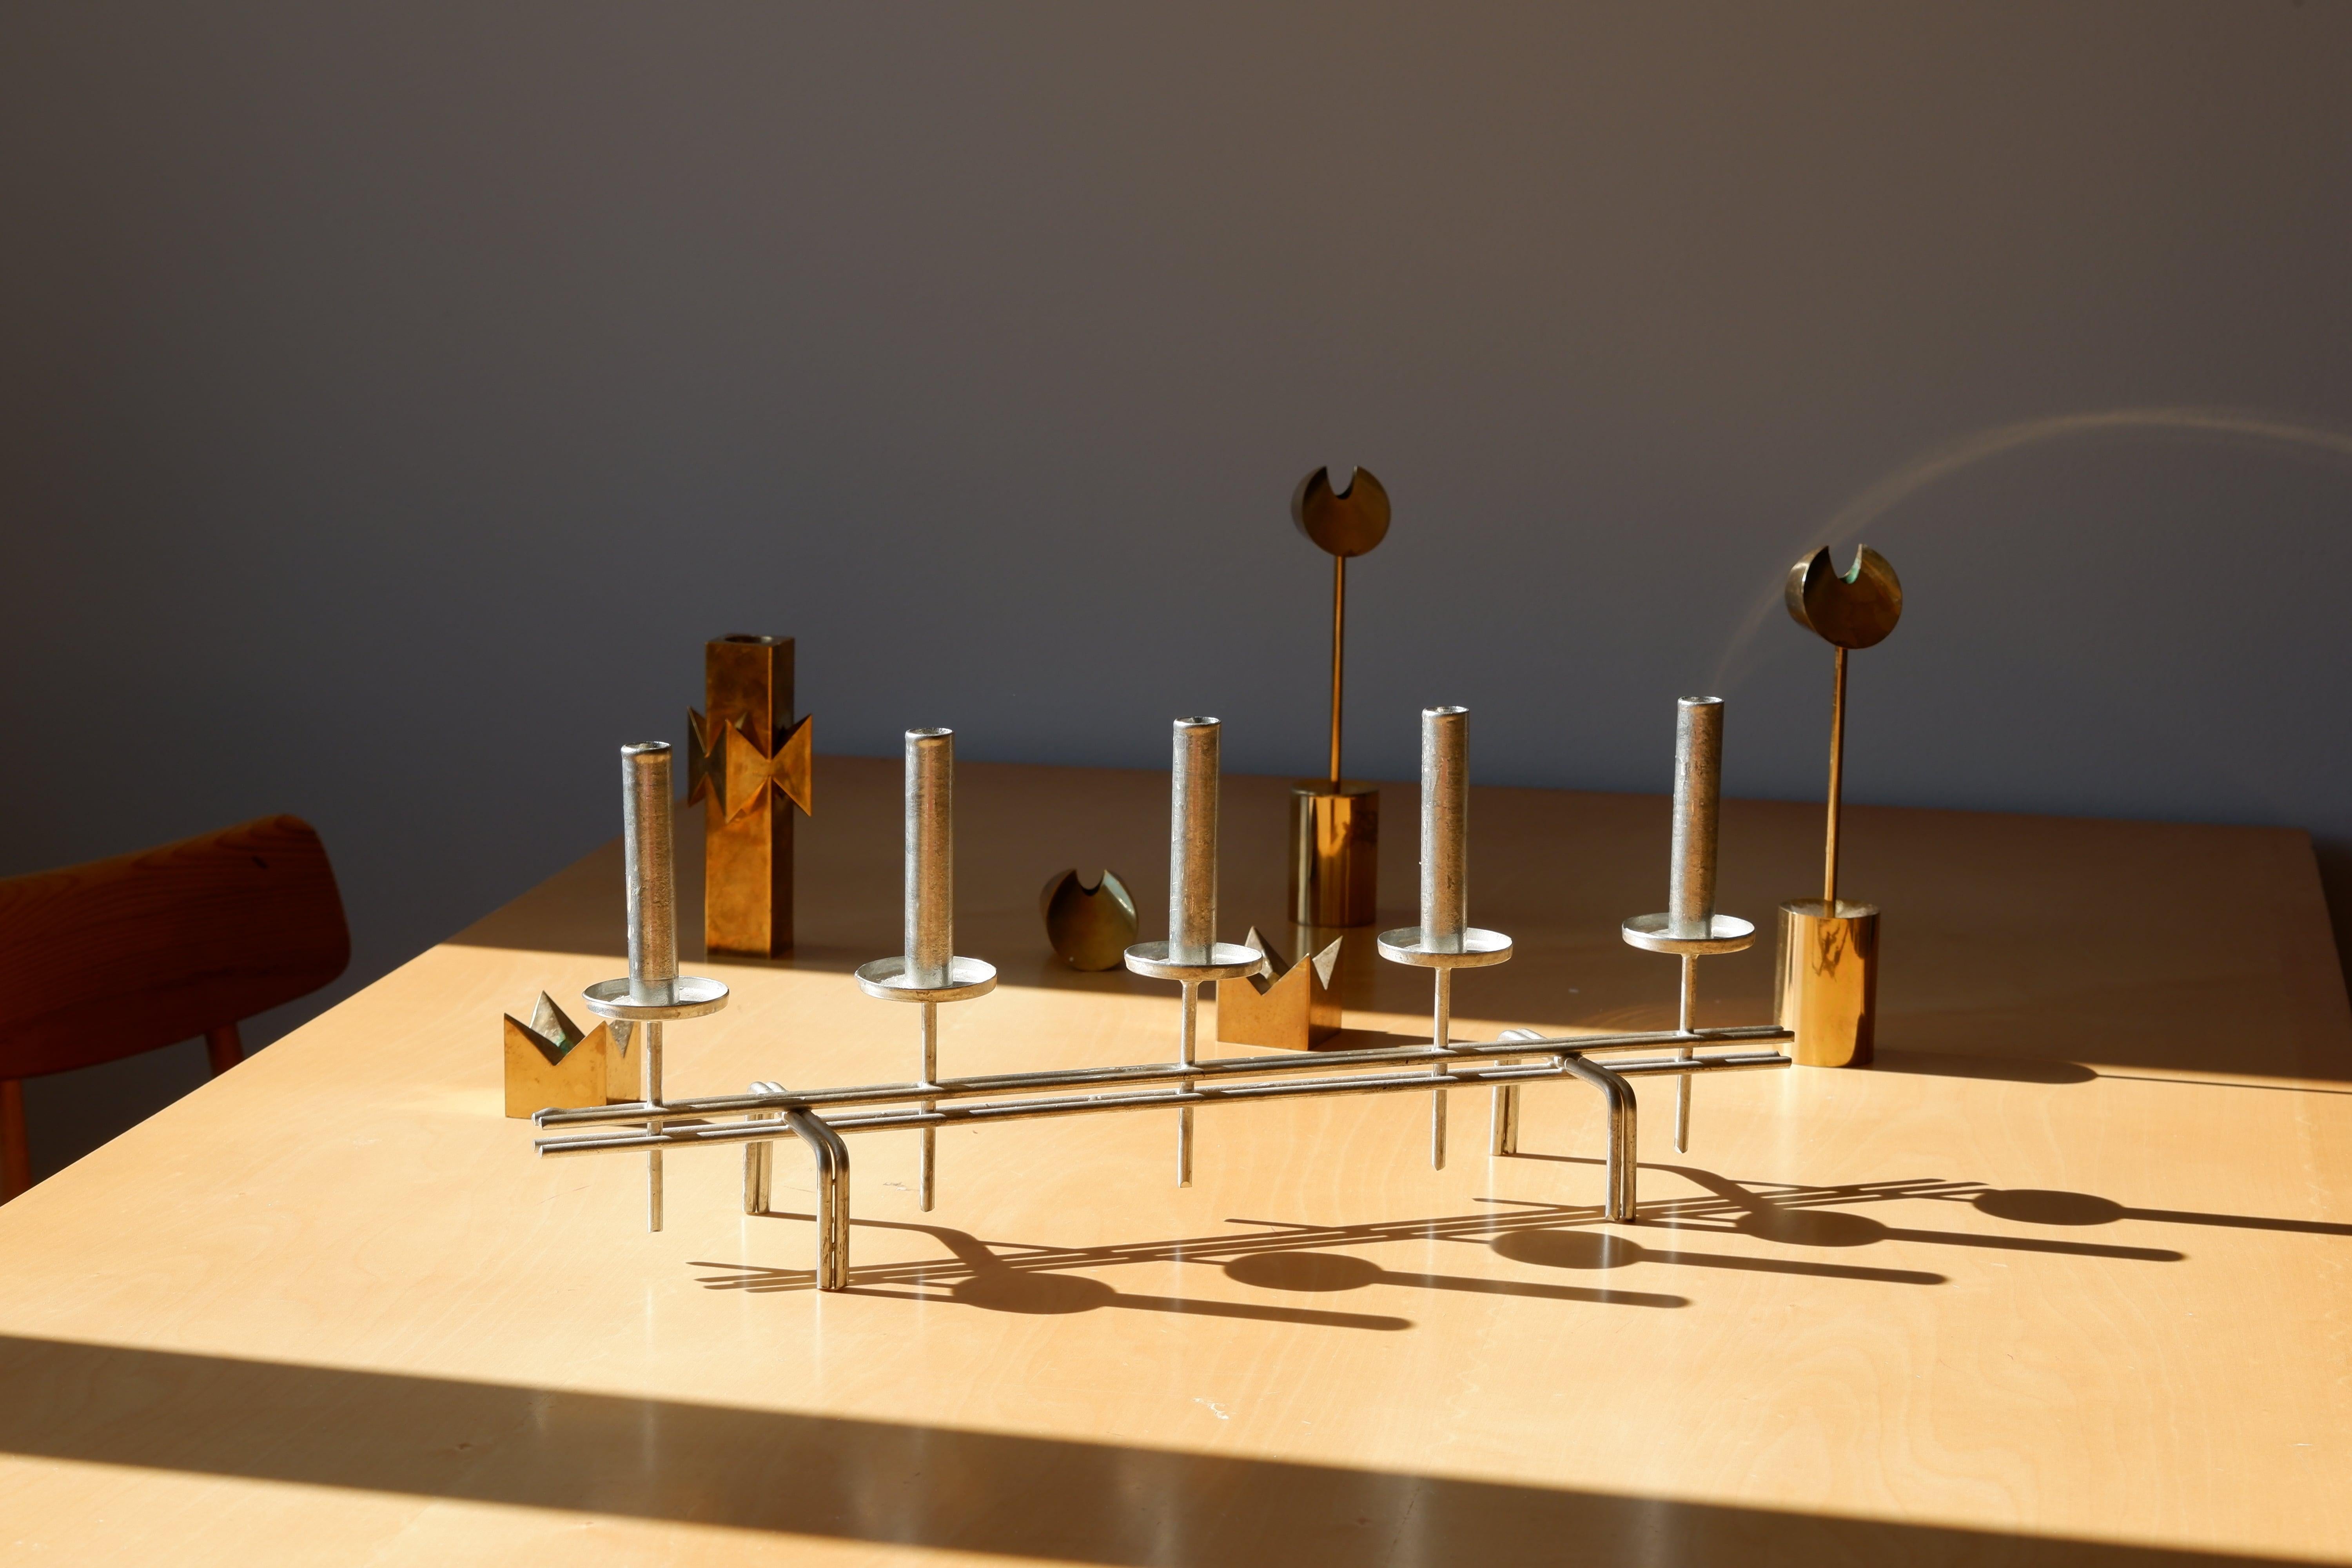 At the end of his artistic journey Paavo Tynell himself handcraft one last collection of candelholder that this model is part of. Made in nickel brass this candel holders is made of 6 candel holders and keeps Paavo Tynell modern vision of design.